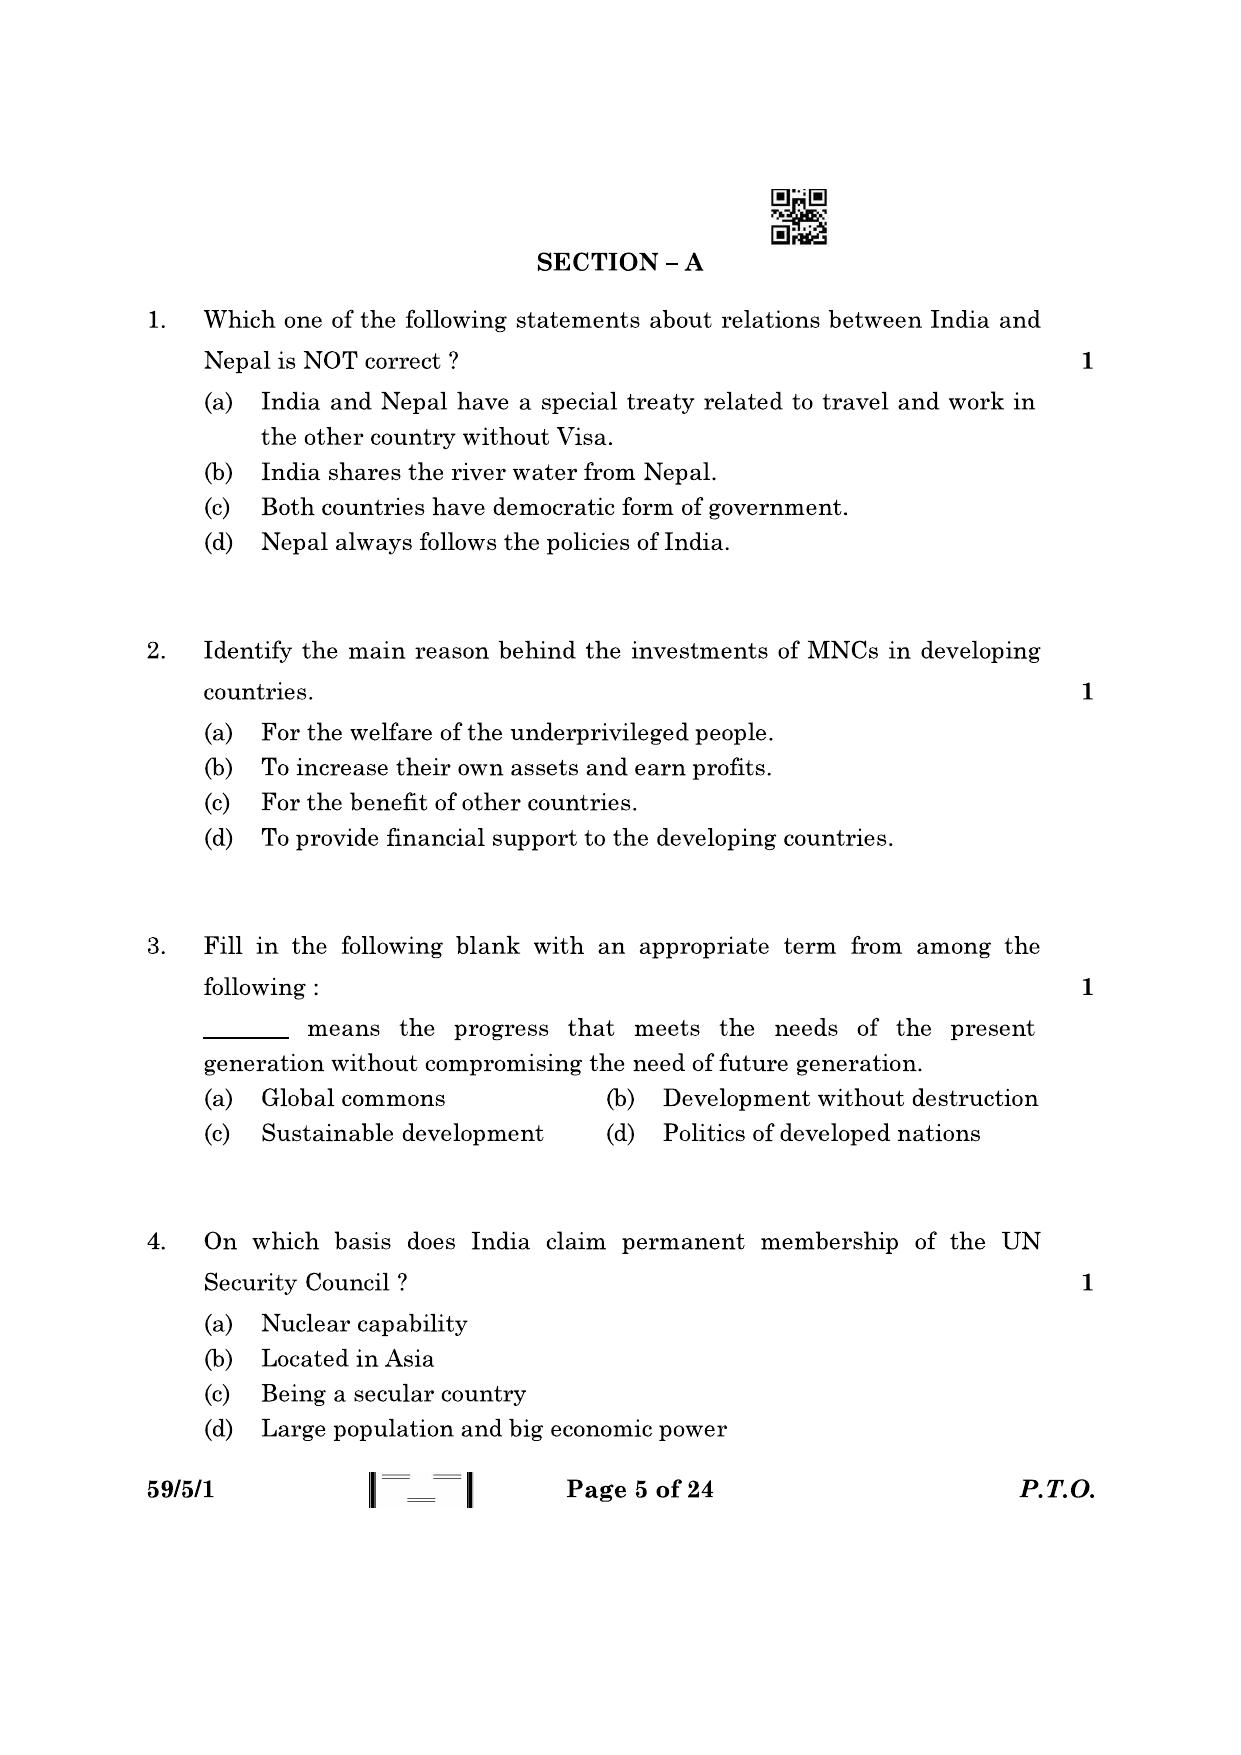 CBSE Class 12 59-5-1 Political Science 2023 Question Paper - Page 5